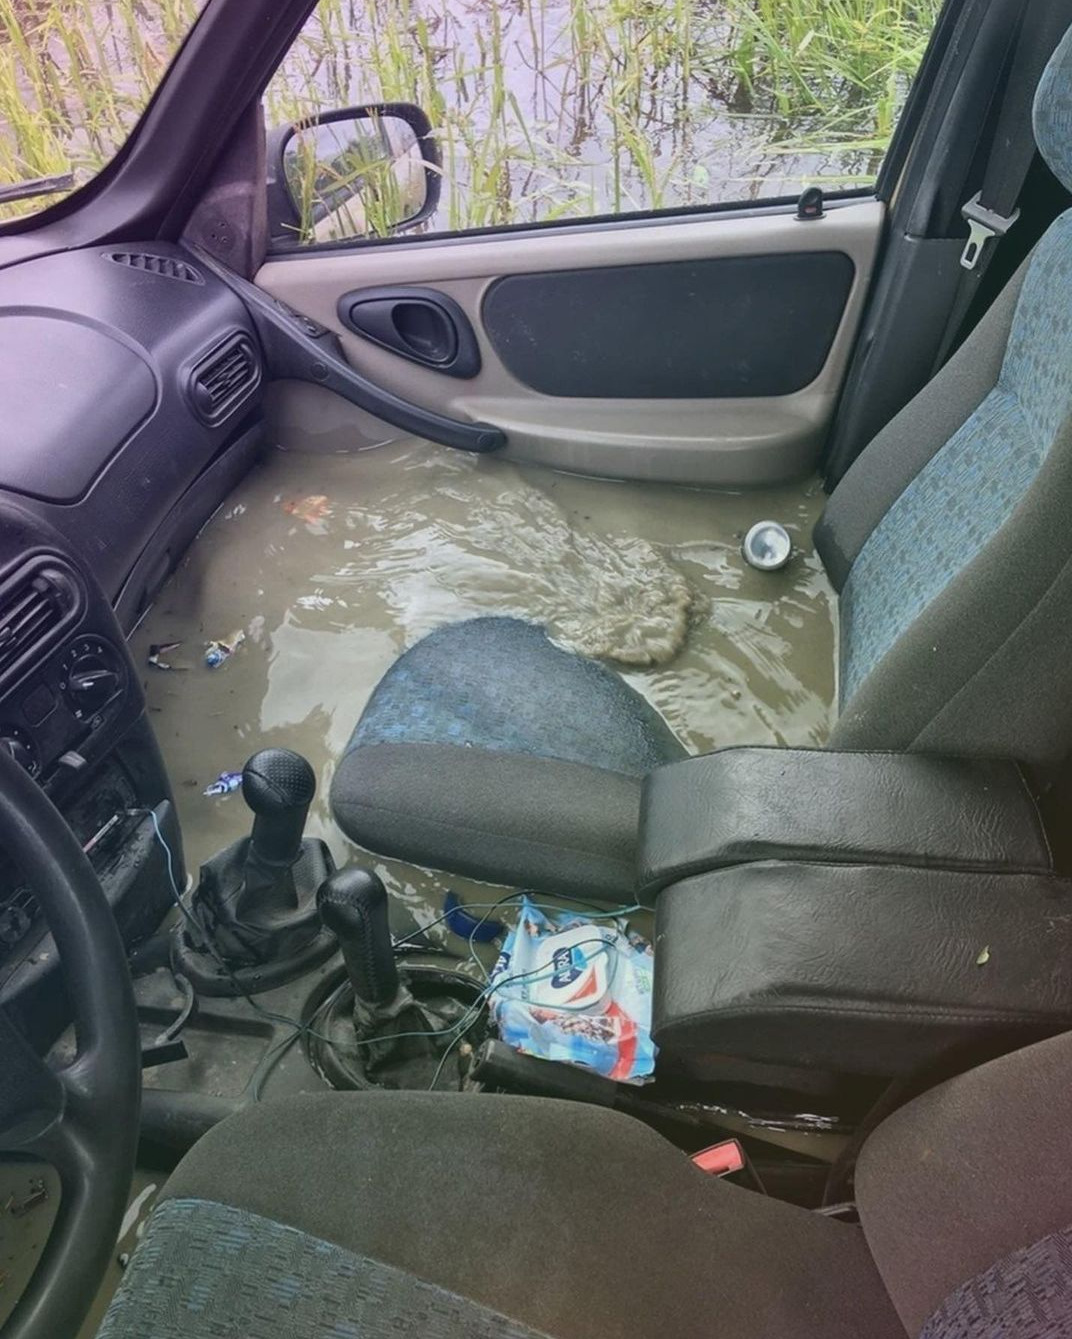 felix-the-snow-cheetah:tyrannosaurus-rex:nuclearbummer:hazmatghost-deactivated20220202:Ha ha, yeah just push that stuff in the back, sorrywhy tf does this car have two stick shiftsHis n hers